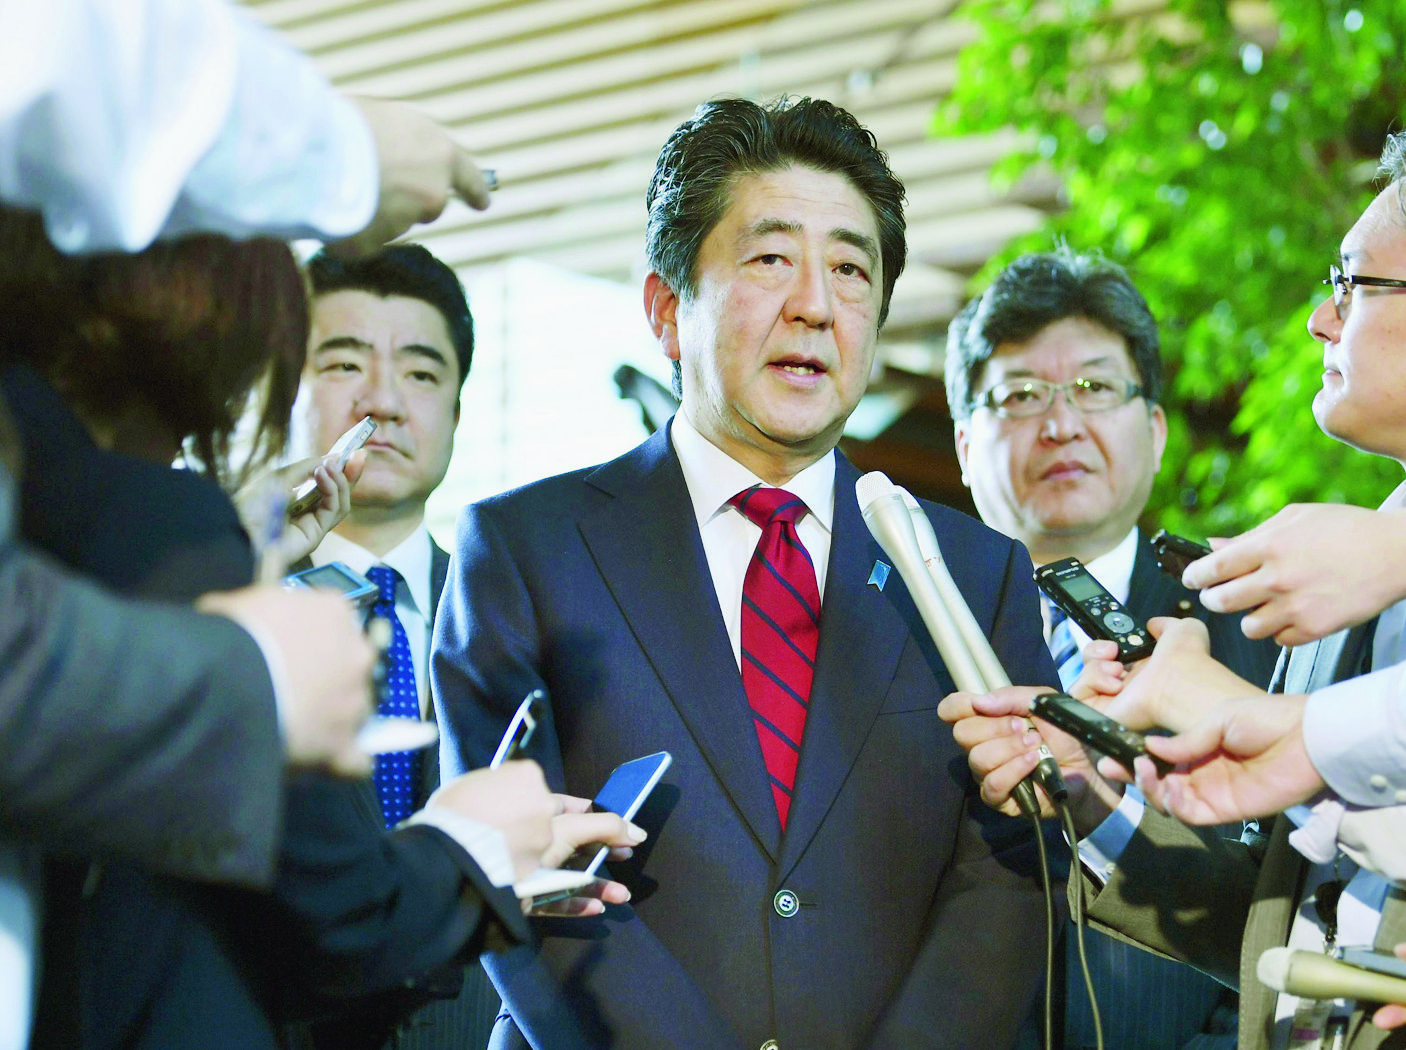 Japanese Prime Minister Shinzo Abe, center, answers to a reporter's question about North Korea's missile launch, at his official residence in Tokyo Monday morning, May 29, 2017. North Korea on Monday fired an apparent ballistic missile off its east coast that landed in the waters of Japan's economic zone, South Korean and Japanese officials said, the latest in a string of recent test launches as the North seeks to build nuclear-tipped ICBMs that can reach the U.S. mainland. (Muneyuki Tomari/Kyodo News via AP) Japan Koreas Tensions